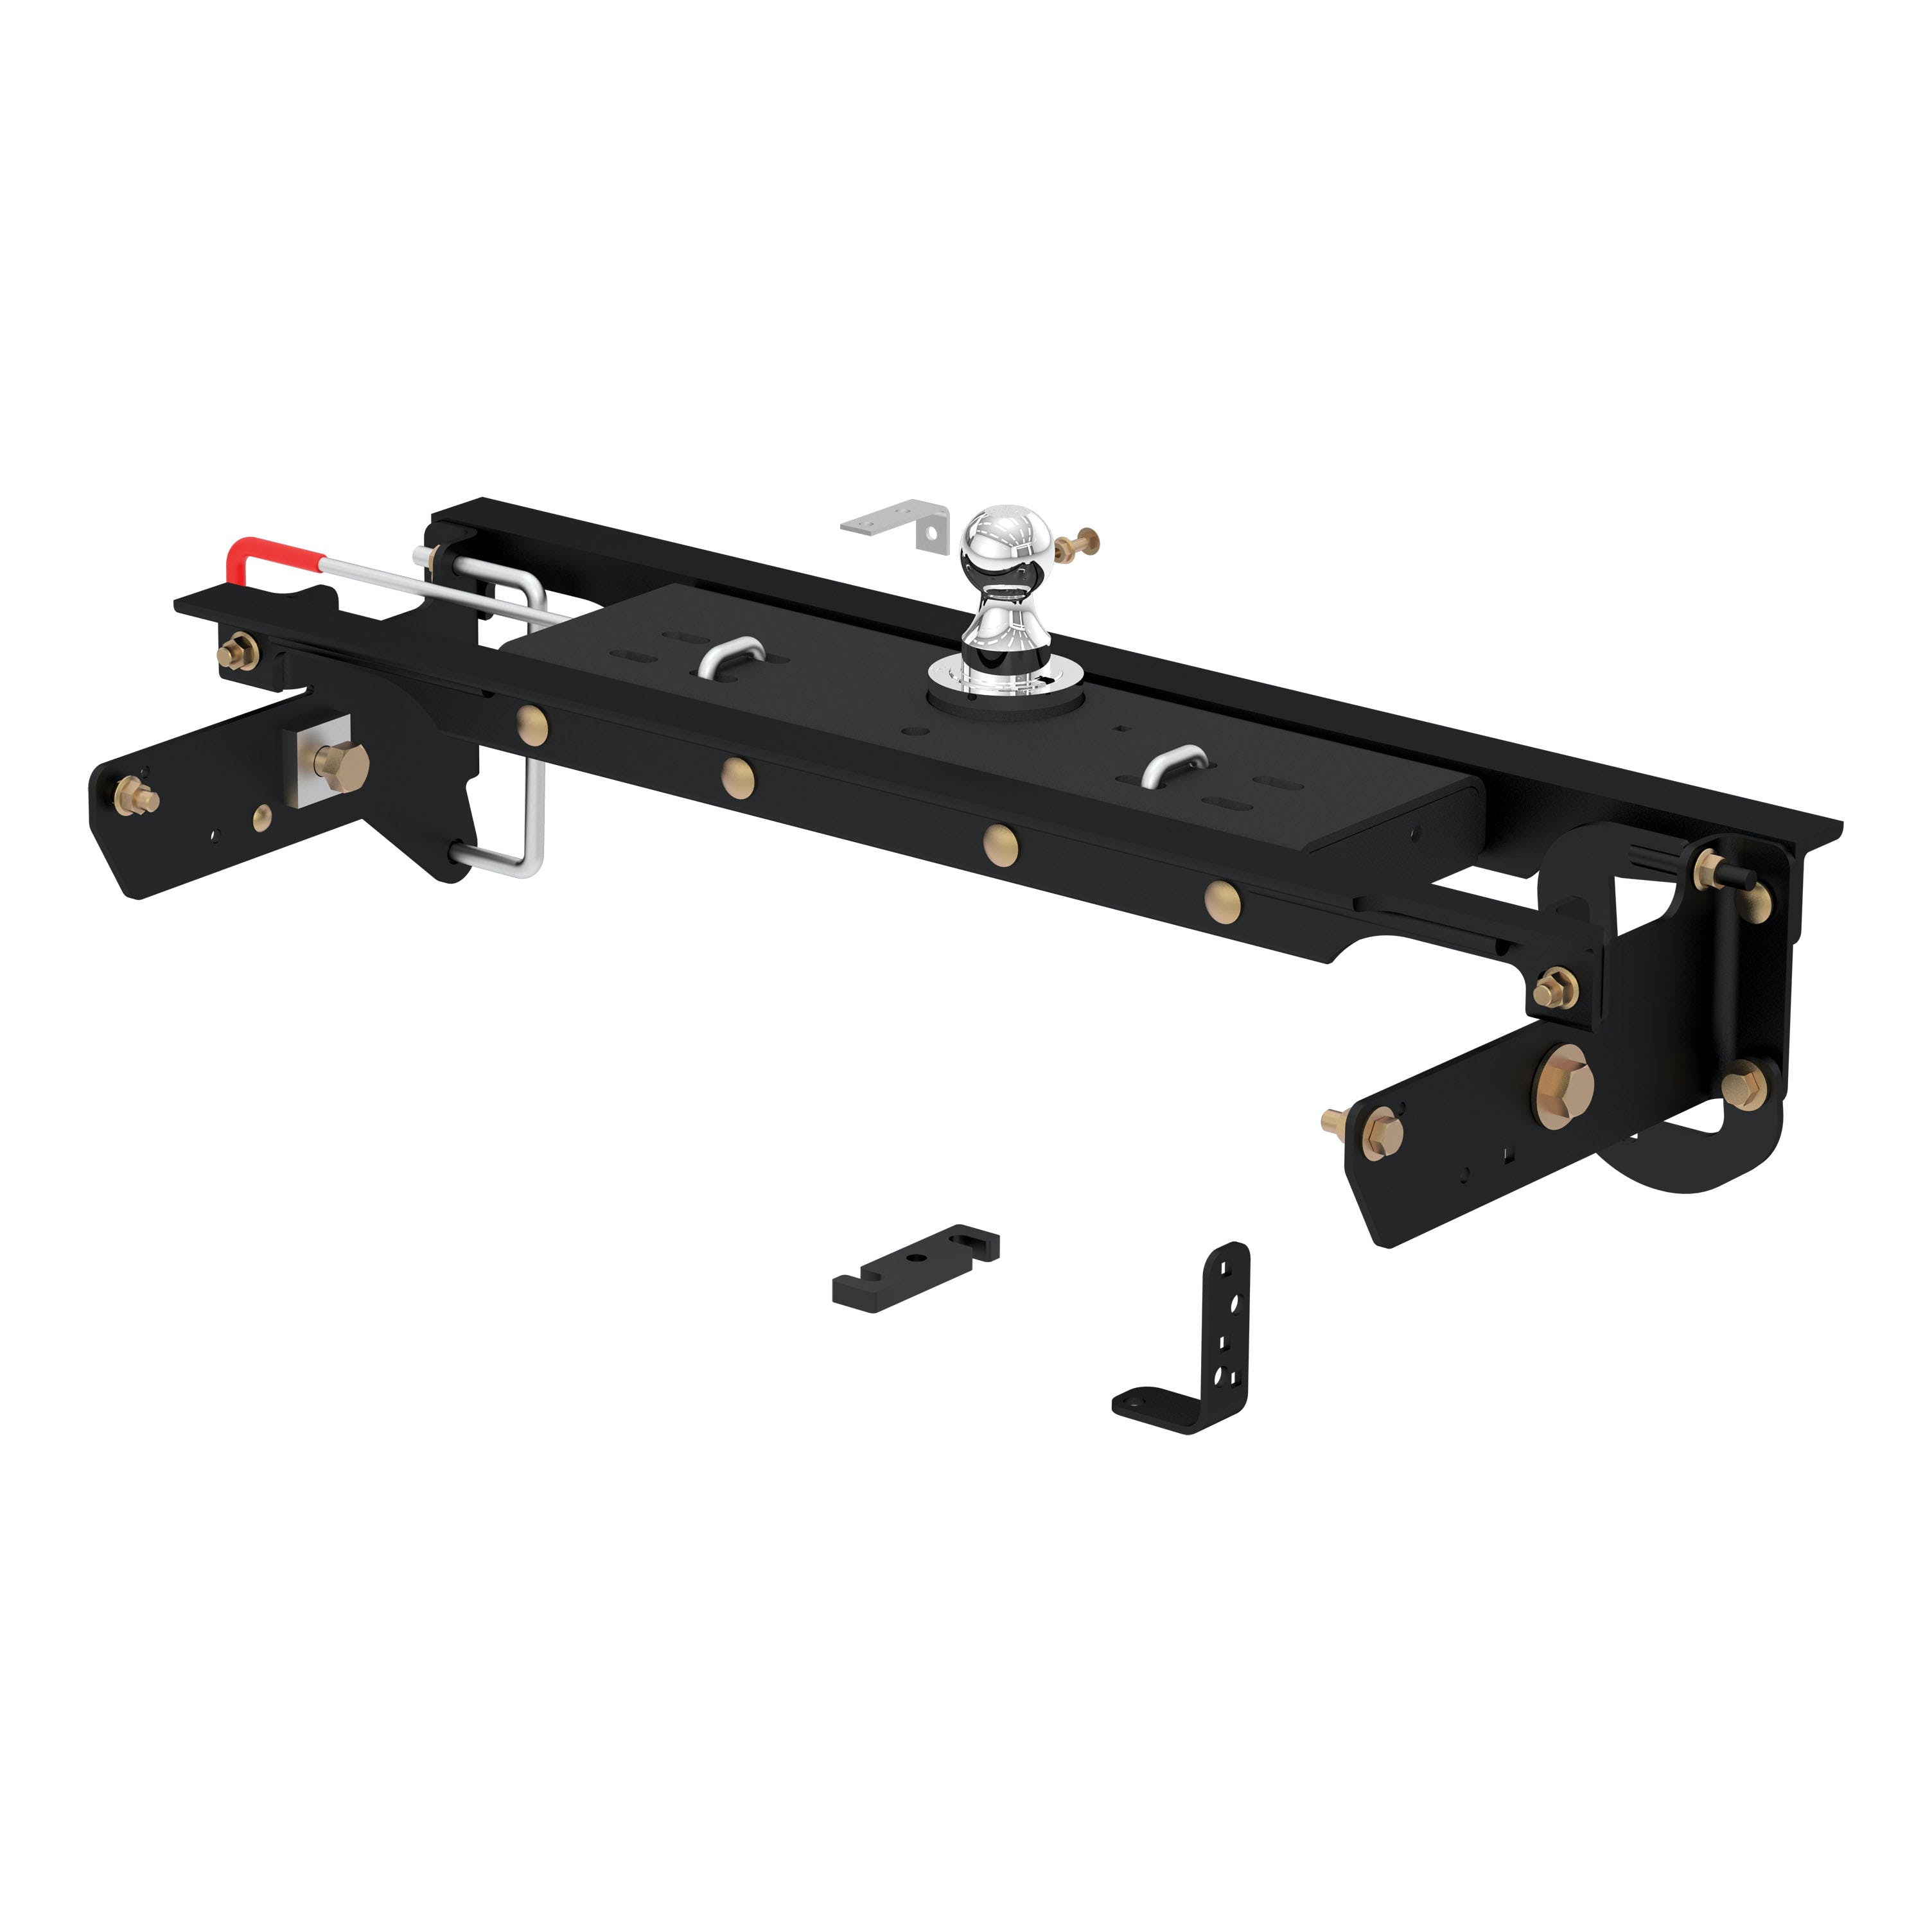 CURT 60720 Double Lock Gooseneck Hitch Kit with Brackets, Select Ford F-250, F-350, F-450